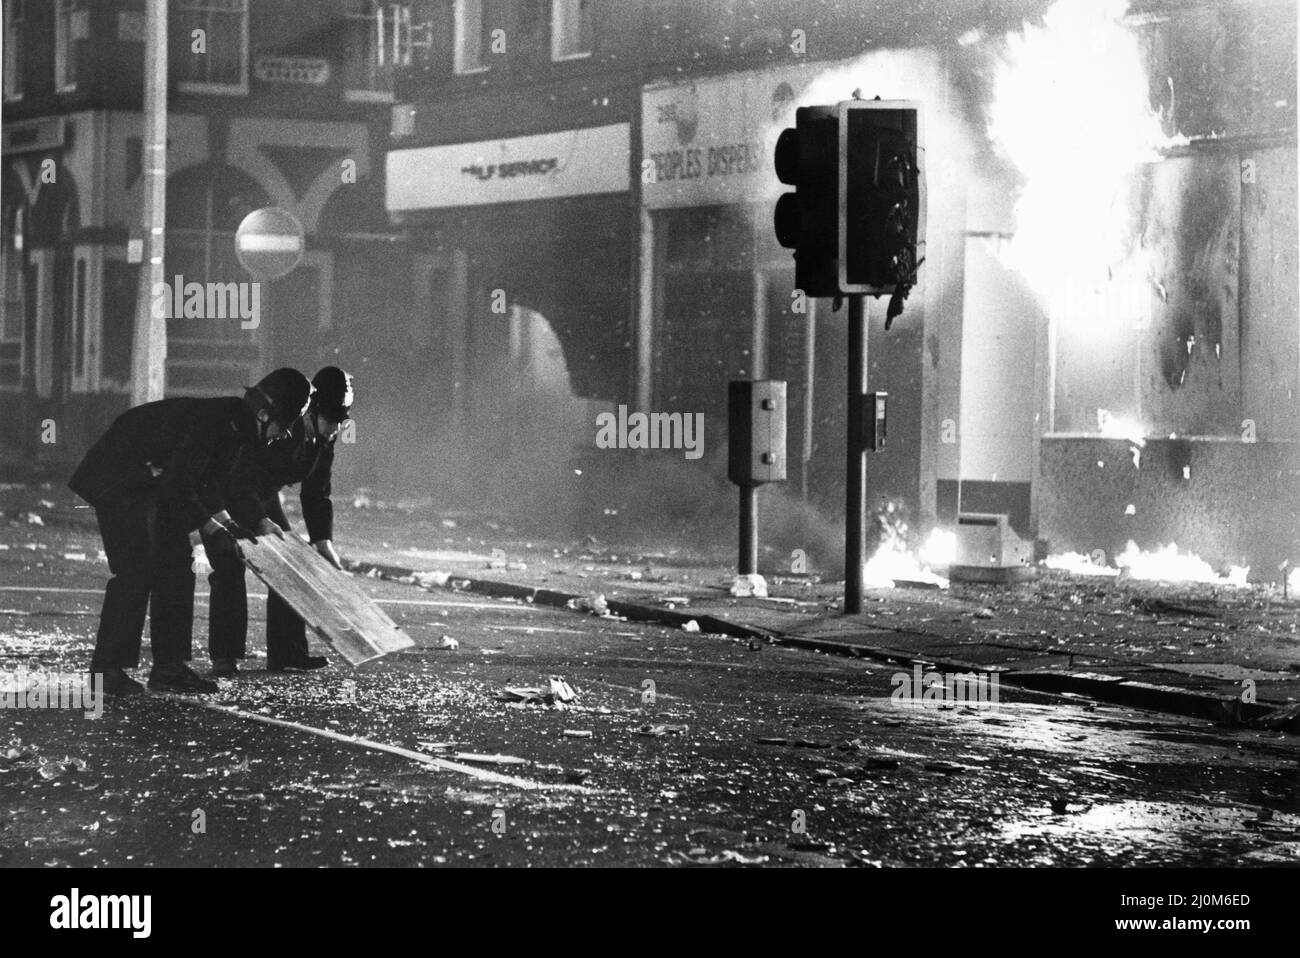 Toxteth Riot 6th July 1981Police officers try to clear broken glass from Park Road outside a burning looted shop, so the fire brigade can control the fire. The riots was sparked following the interception by police of motorcyclists Leroy Cooper in Selbourne Street. A crowd gathered, name-calling grew into jostling and within minutes there was a full-scale fracas that saw three police officers hurt and a young local man, arrested on assault charges. It did not stop there. Police mounted extra patrols in the area and early the following evening, July 4, they came under attack from a crowd armed Stock Photo